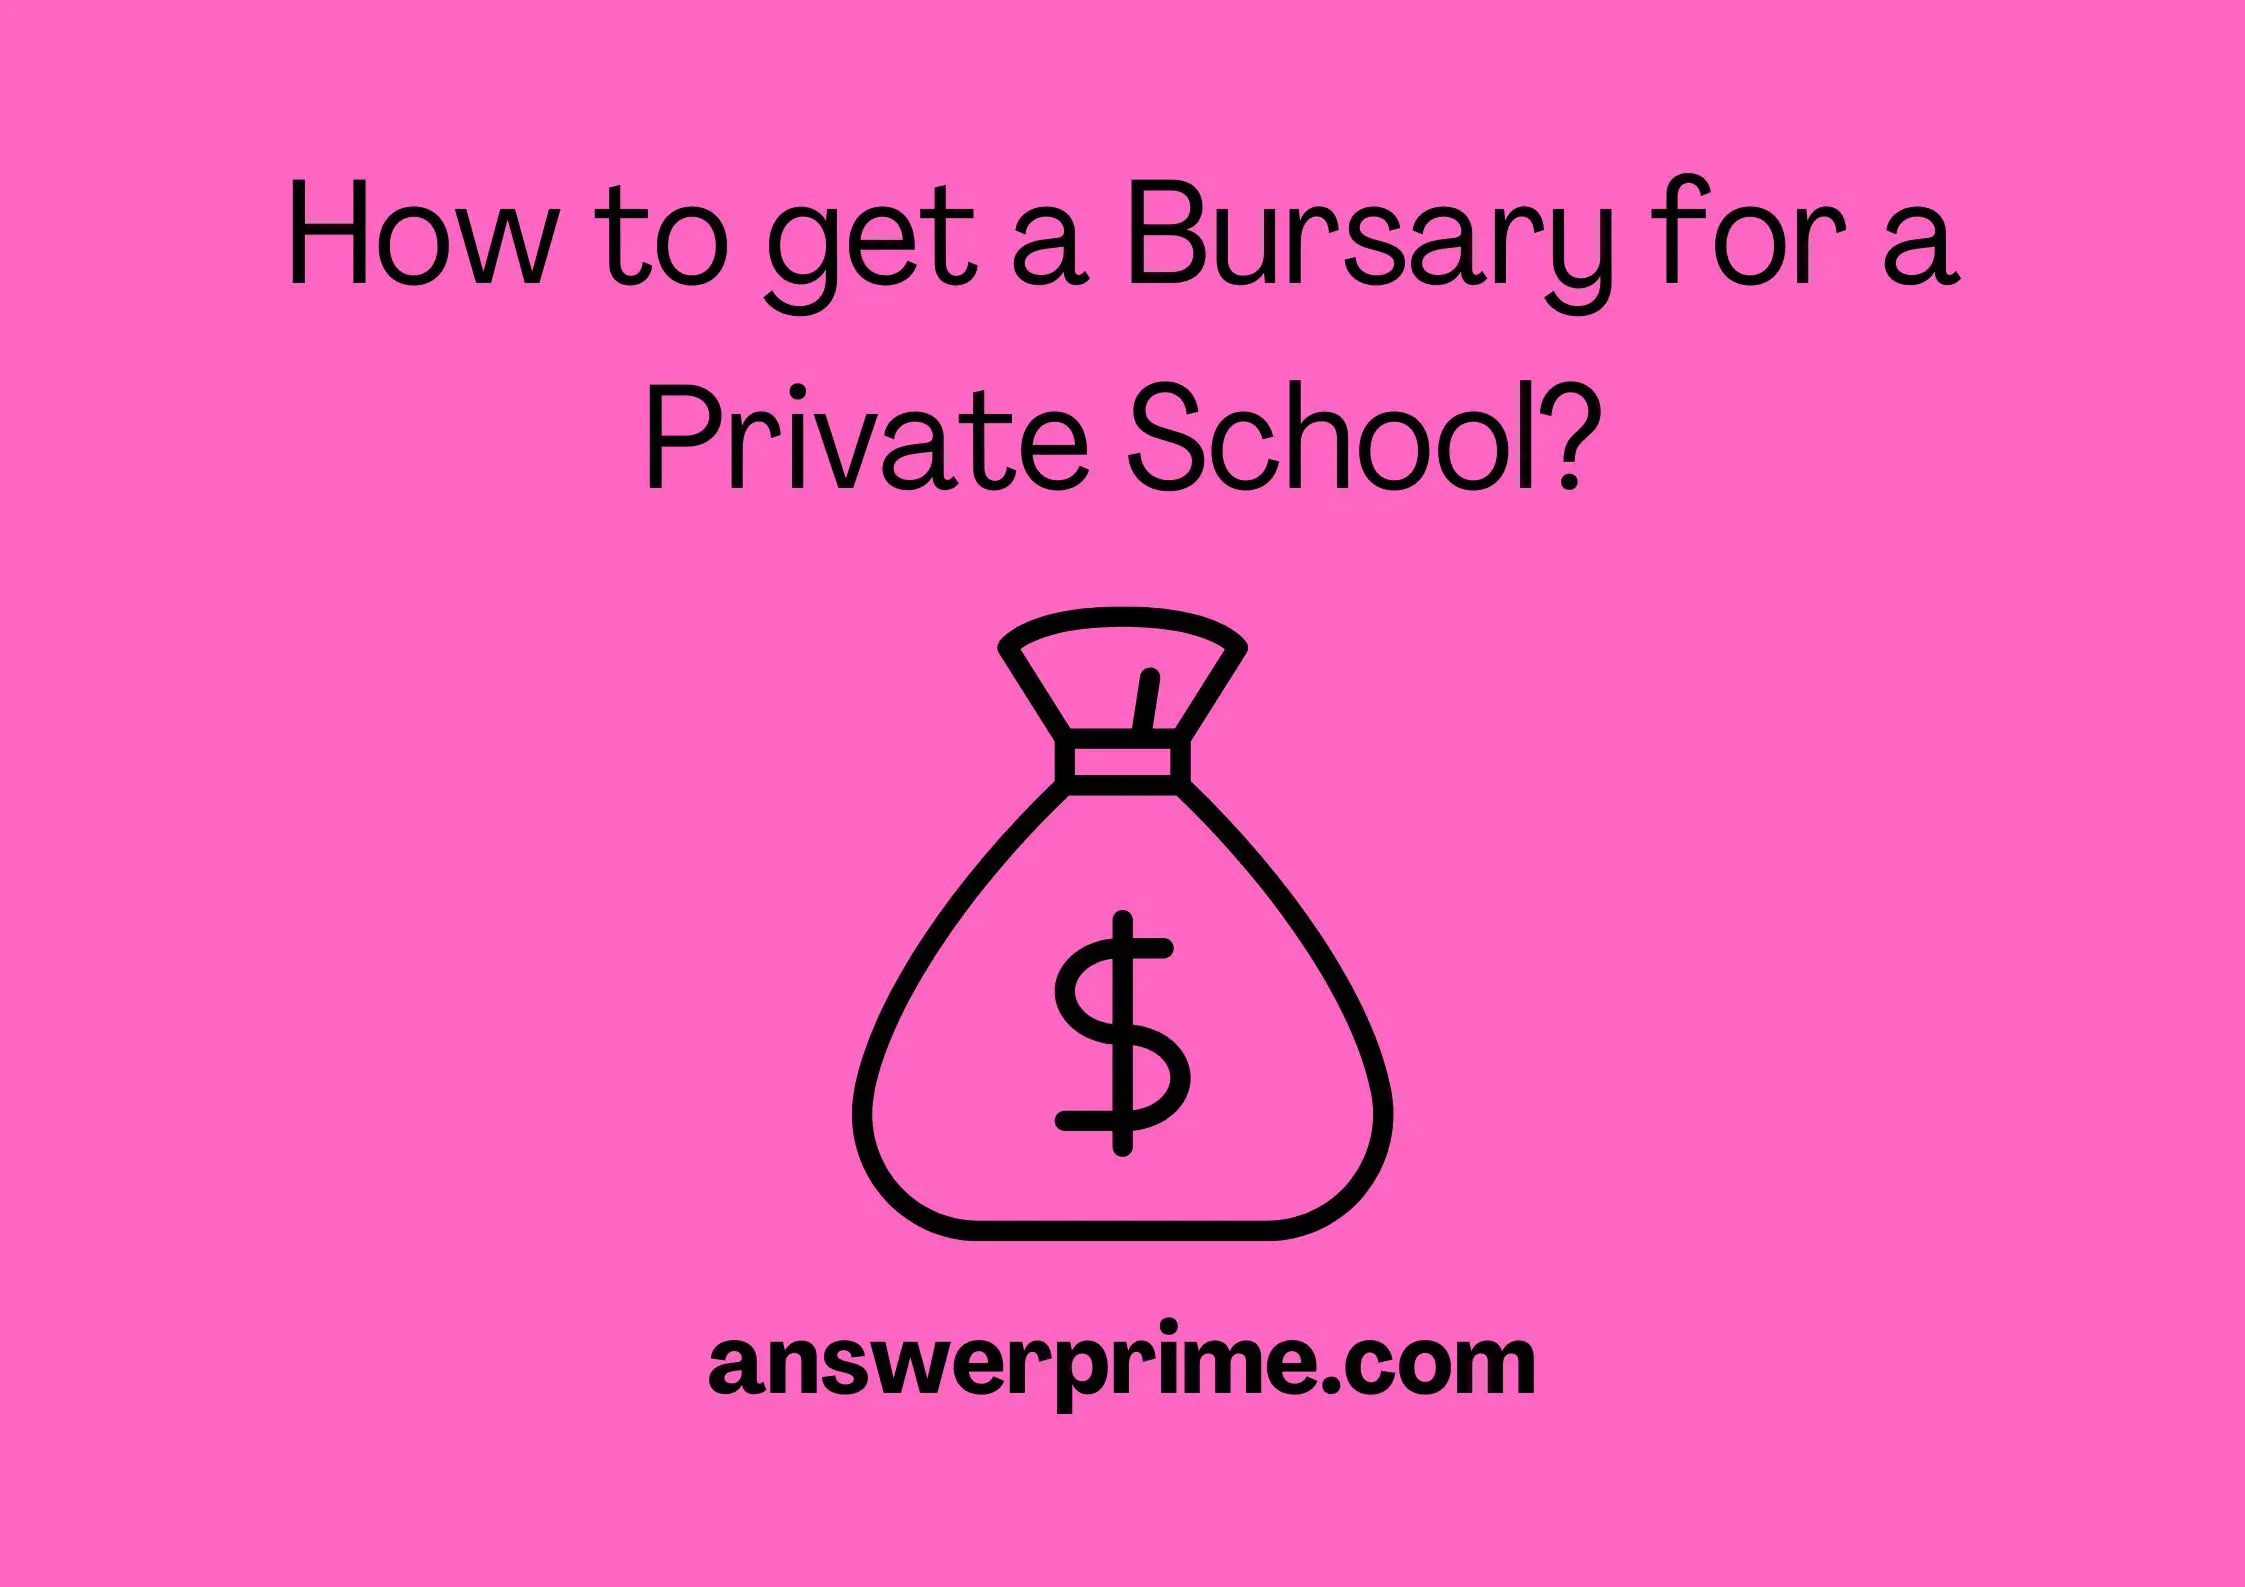 How to get a Bursary for a Private School?